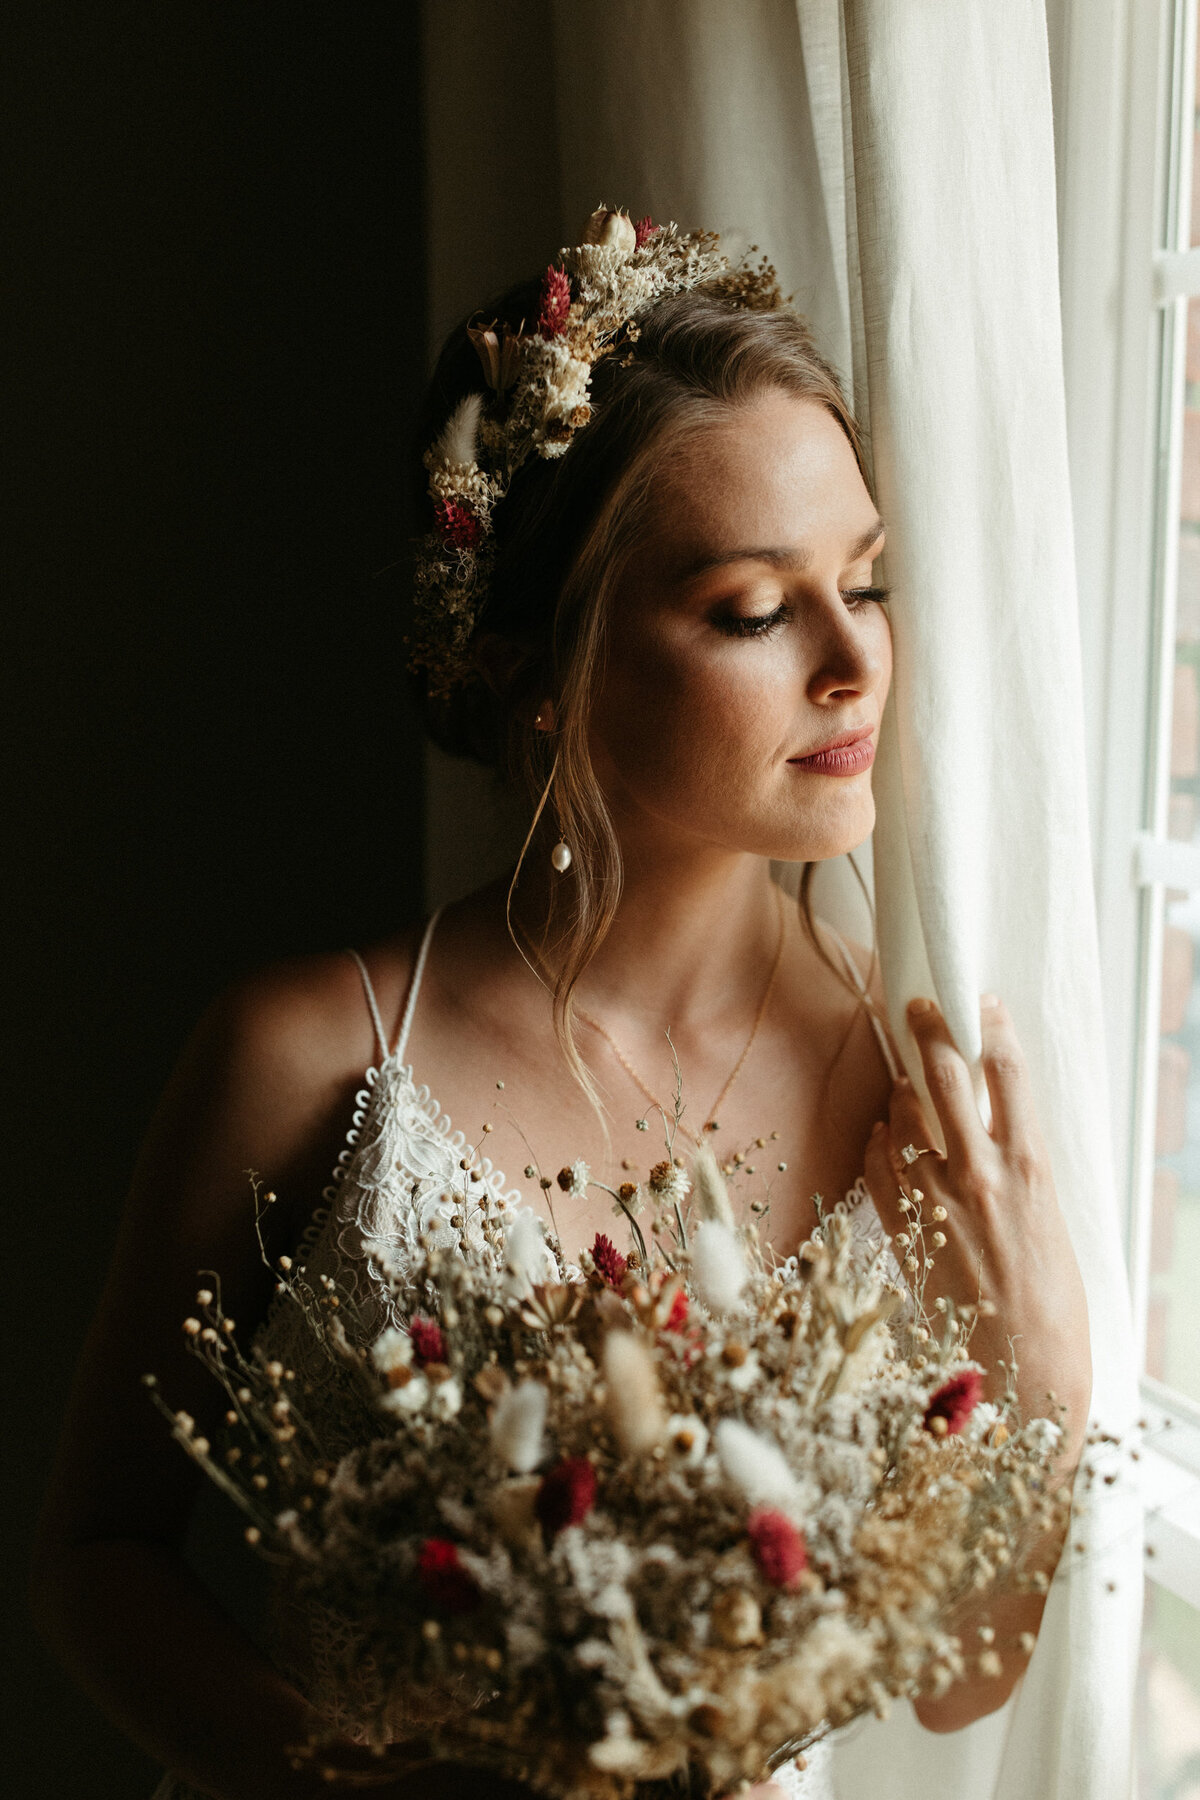 Boho bride in intricate lace dress and flower crown holding bouquet made of dried florals